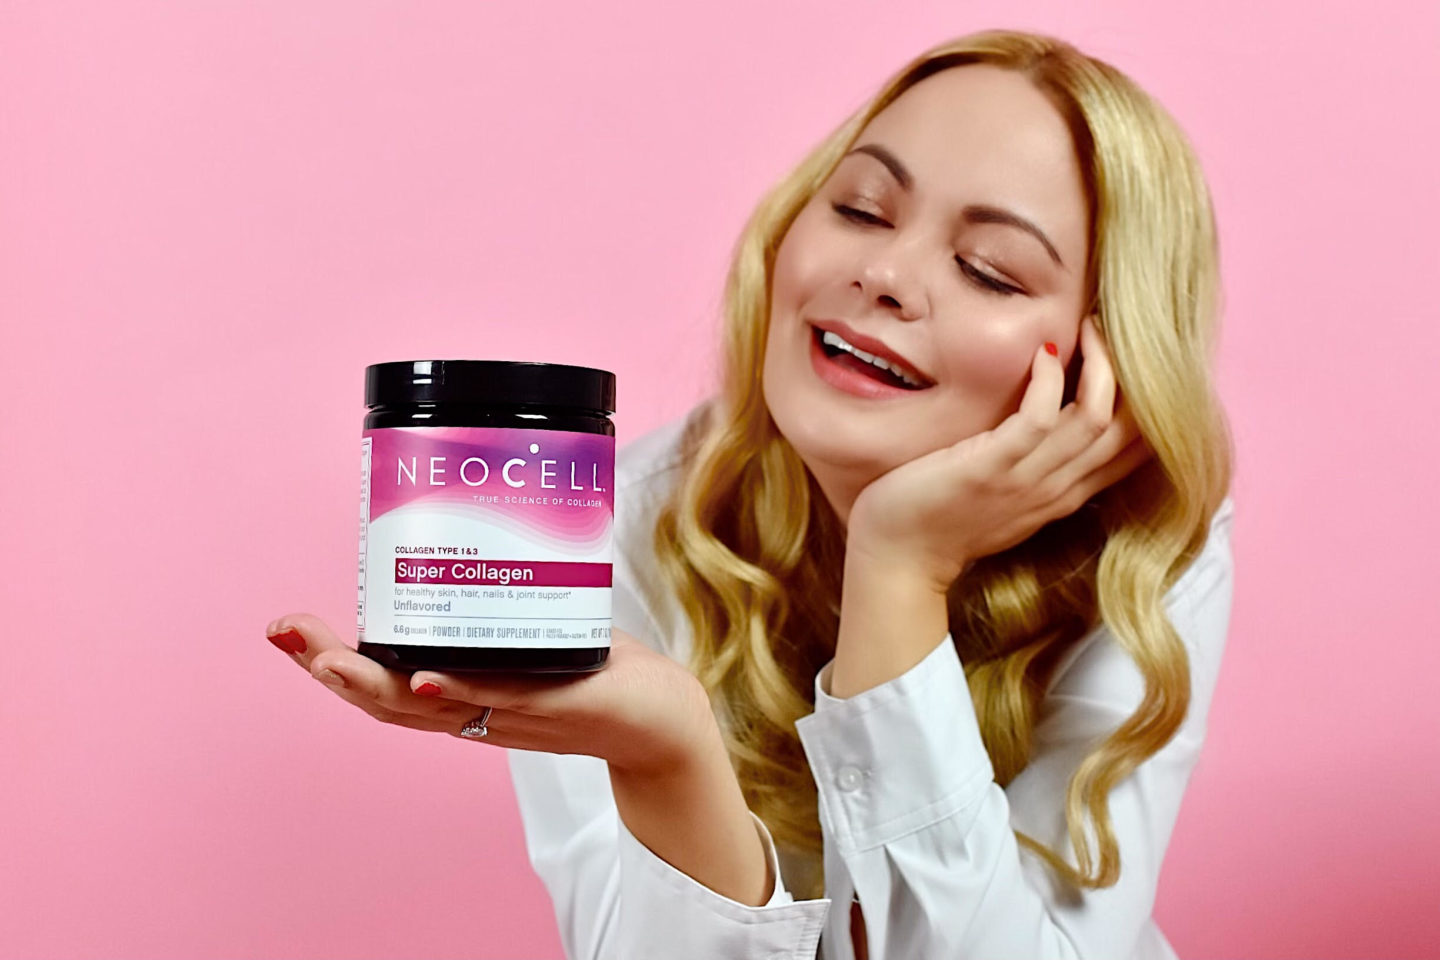 Beauty-Journey-to-Healthy-Hair-Skin-Nails-Neocell-Collagen-Vanessa-Lambert-Blogger-WhatWouldVWear